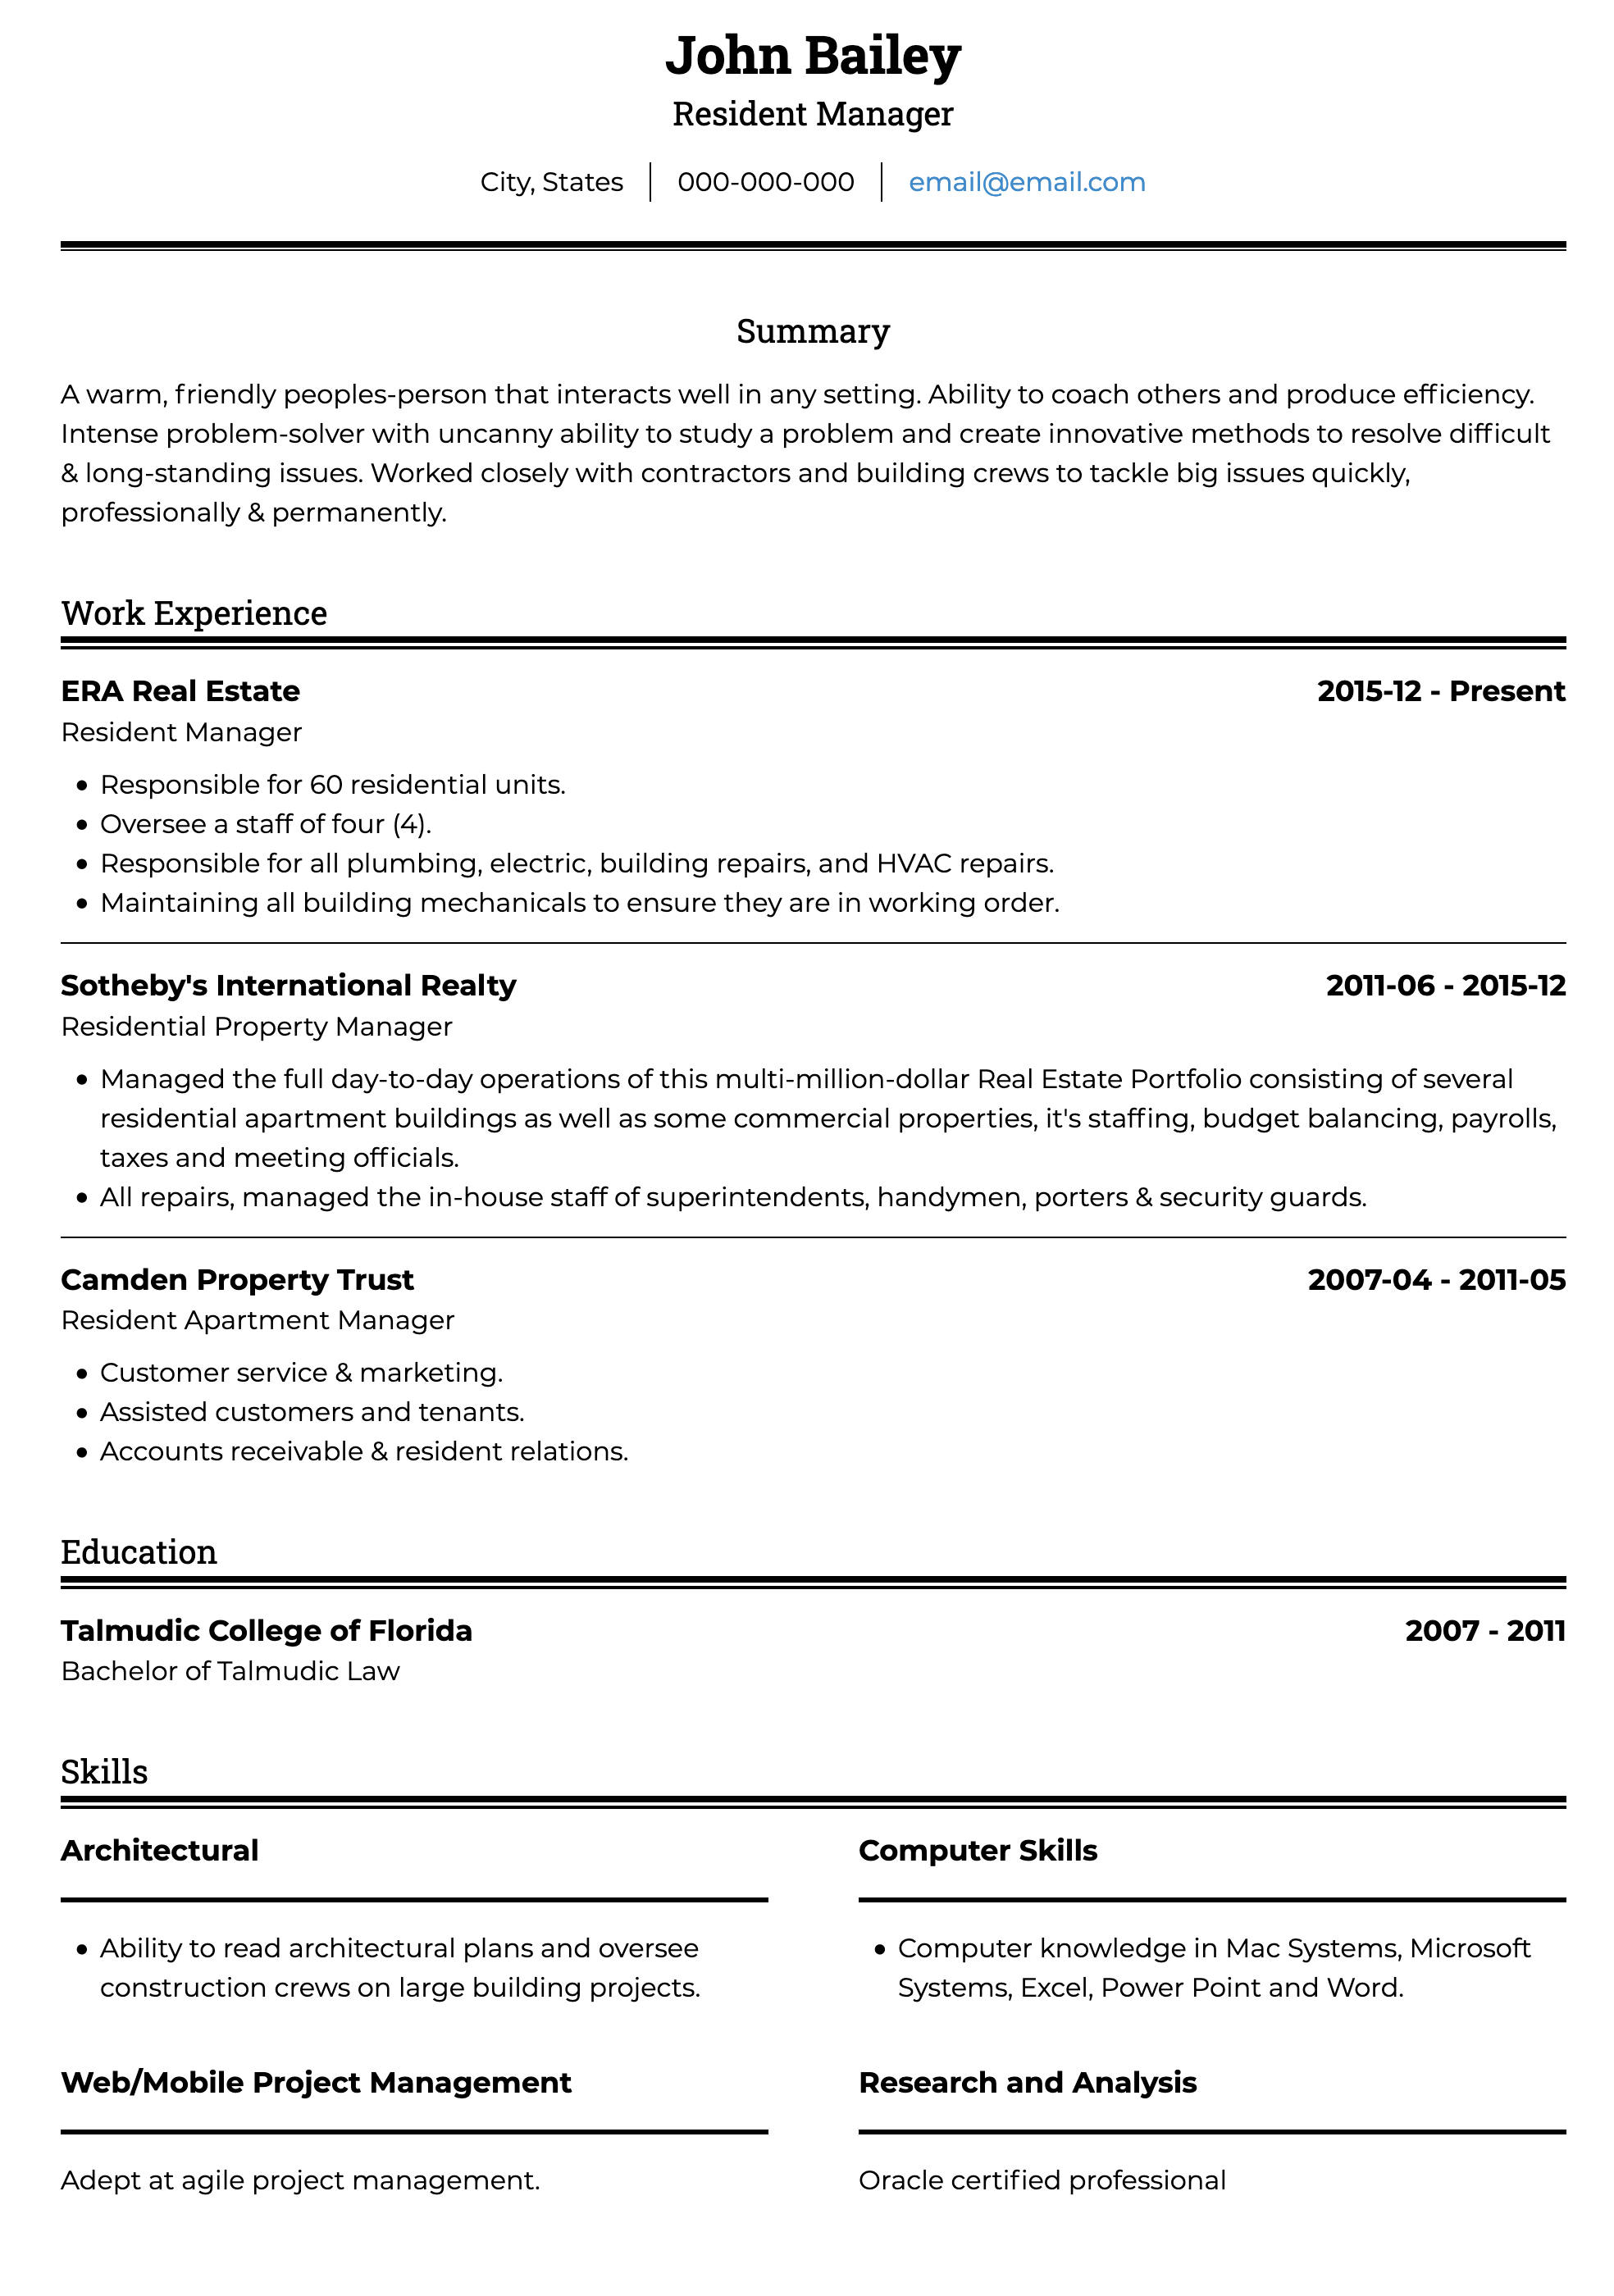 ats-resume-template-cool-writing-an-attractive-ats-resume-resume-template-resume-overused